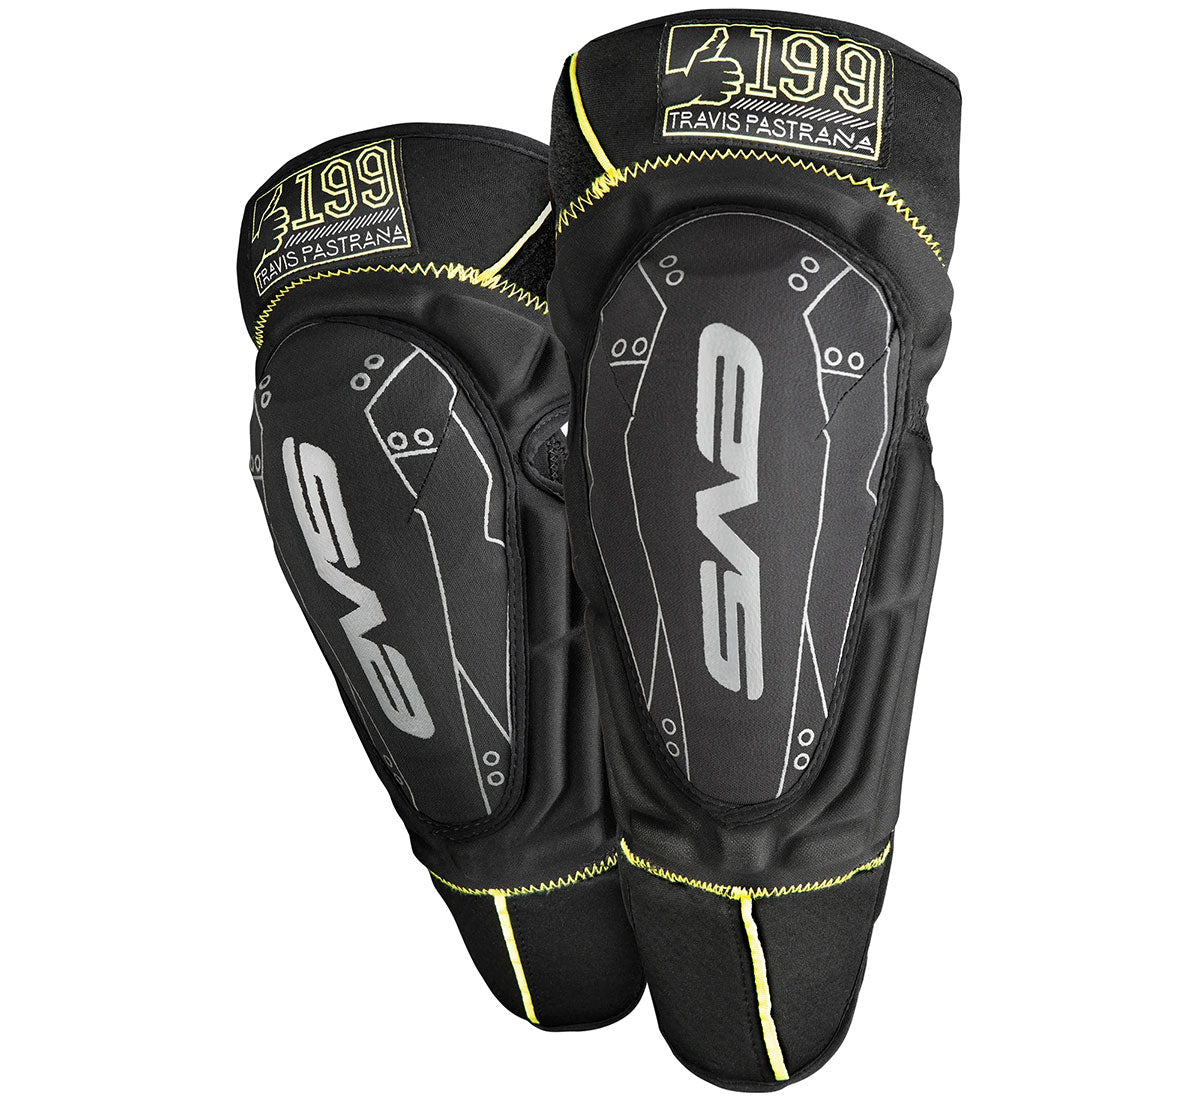 EVS TP199 Youth Knee Pads